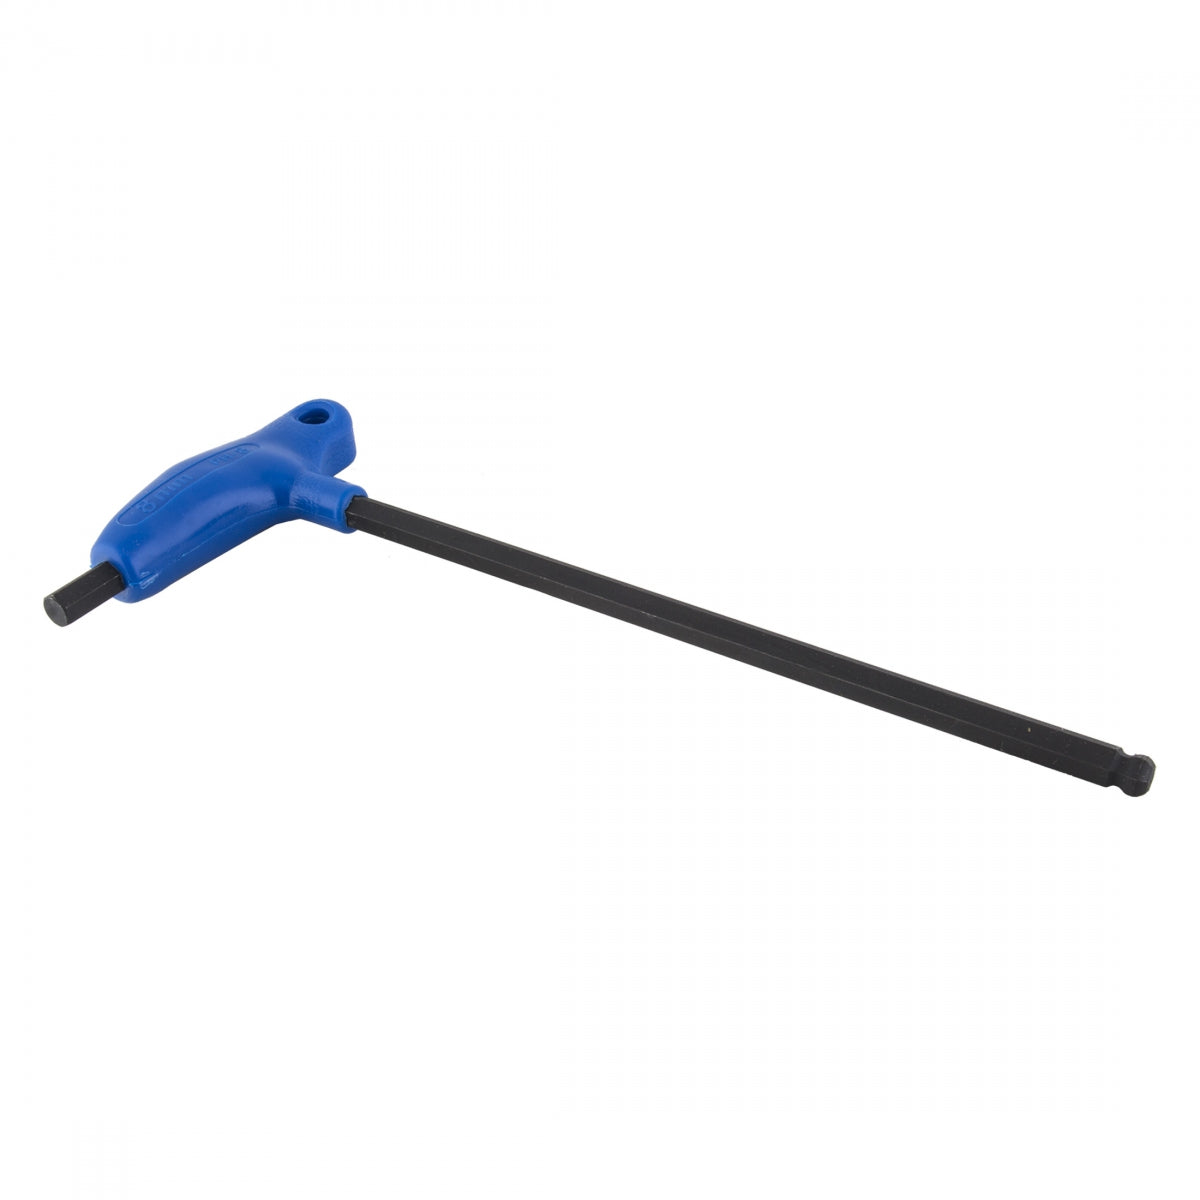 Park Tool #PH-8 P-Handle Hex Wrench, 8mm